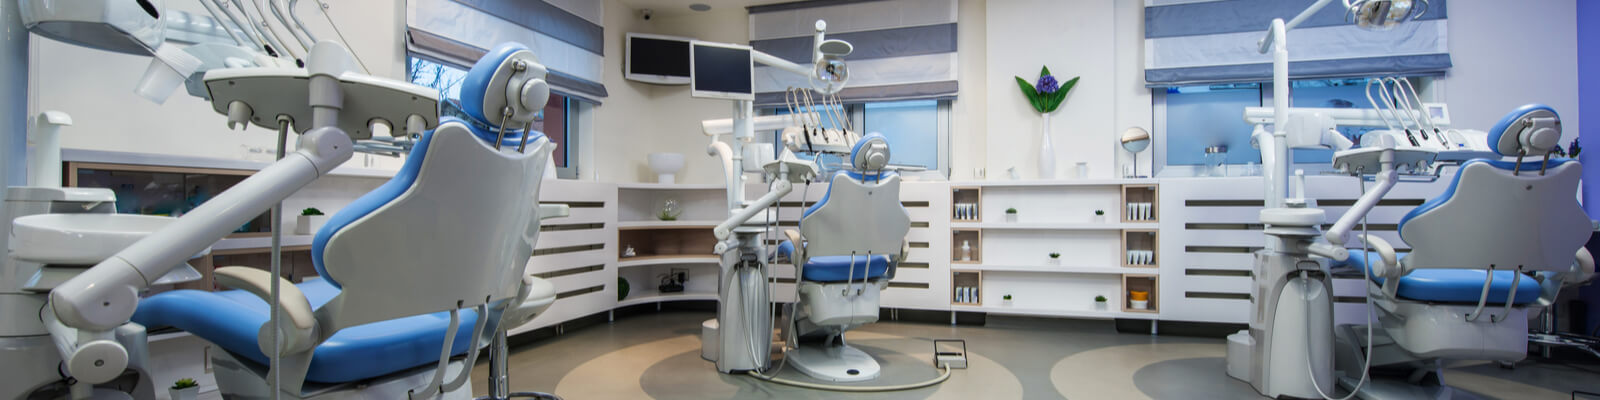 buying a dental practice - feature image